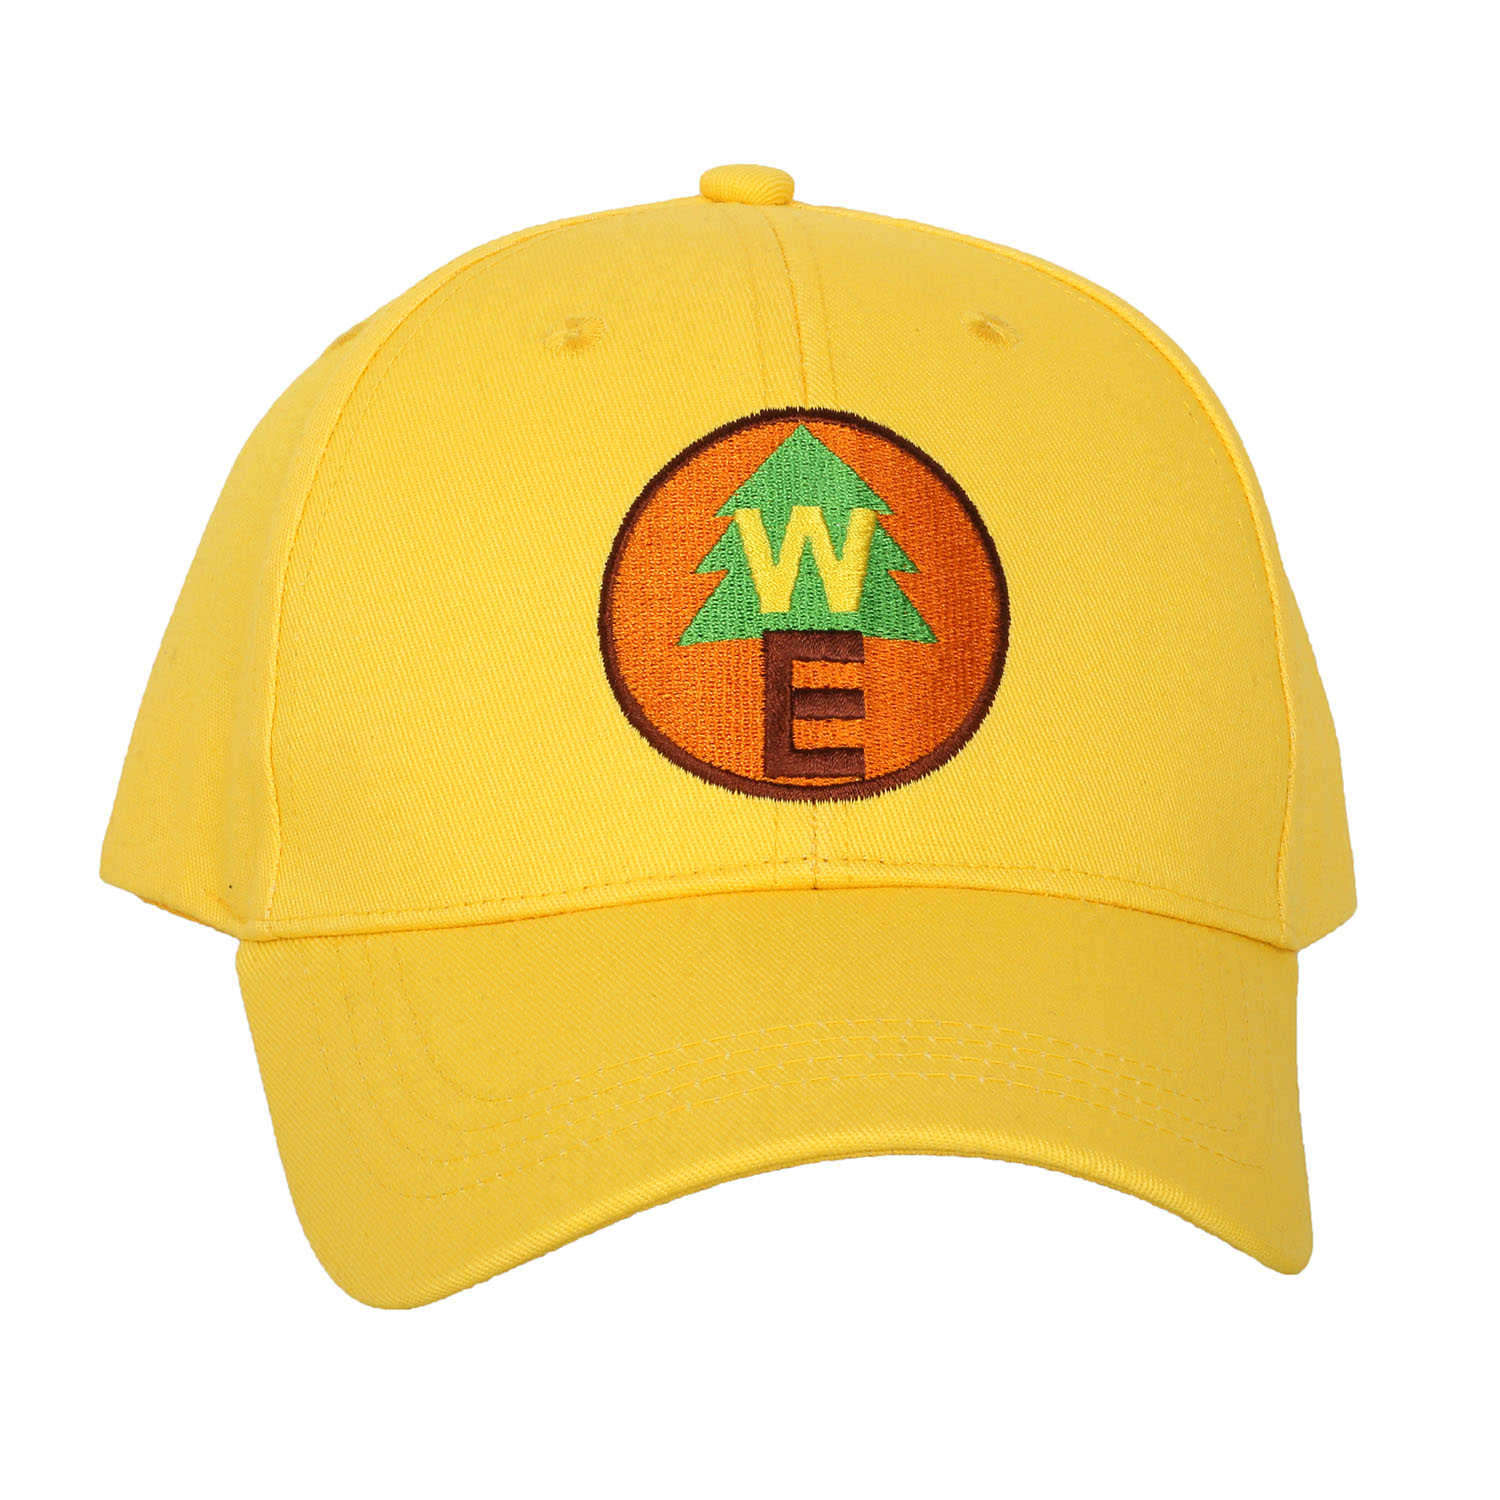 Xcoser Up Russell Cap Yellow Embroidered Style Baseball Cap Hat ...